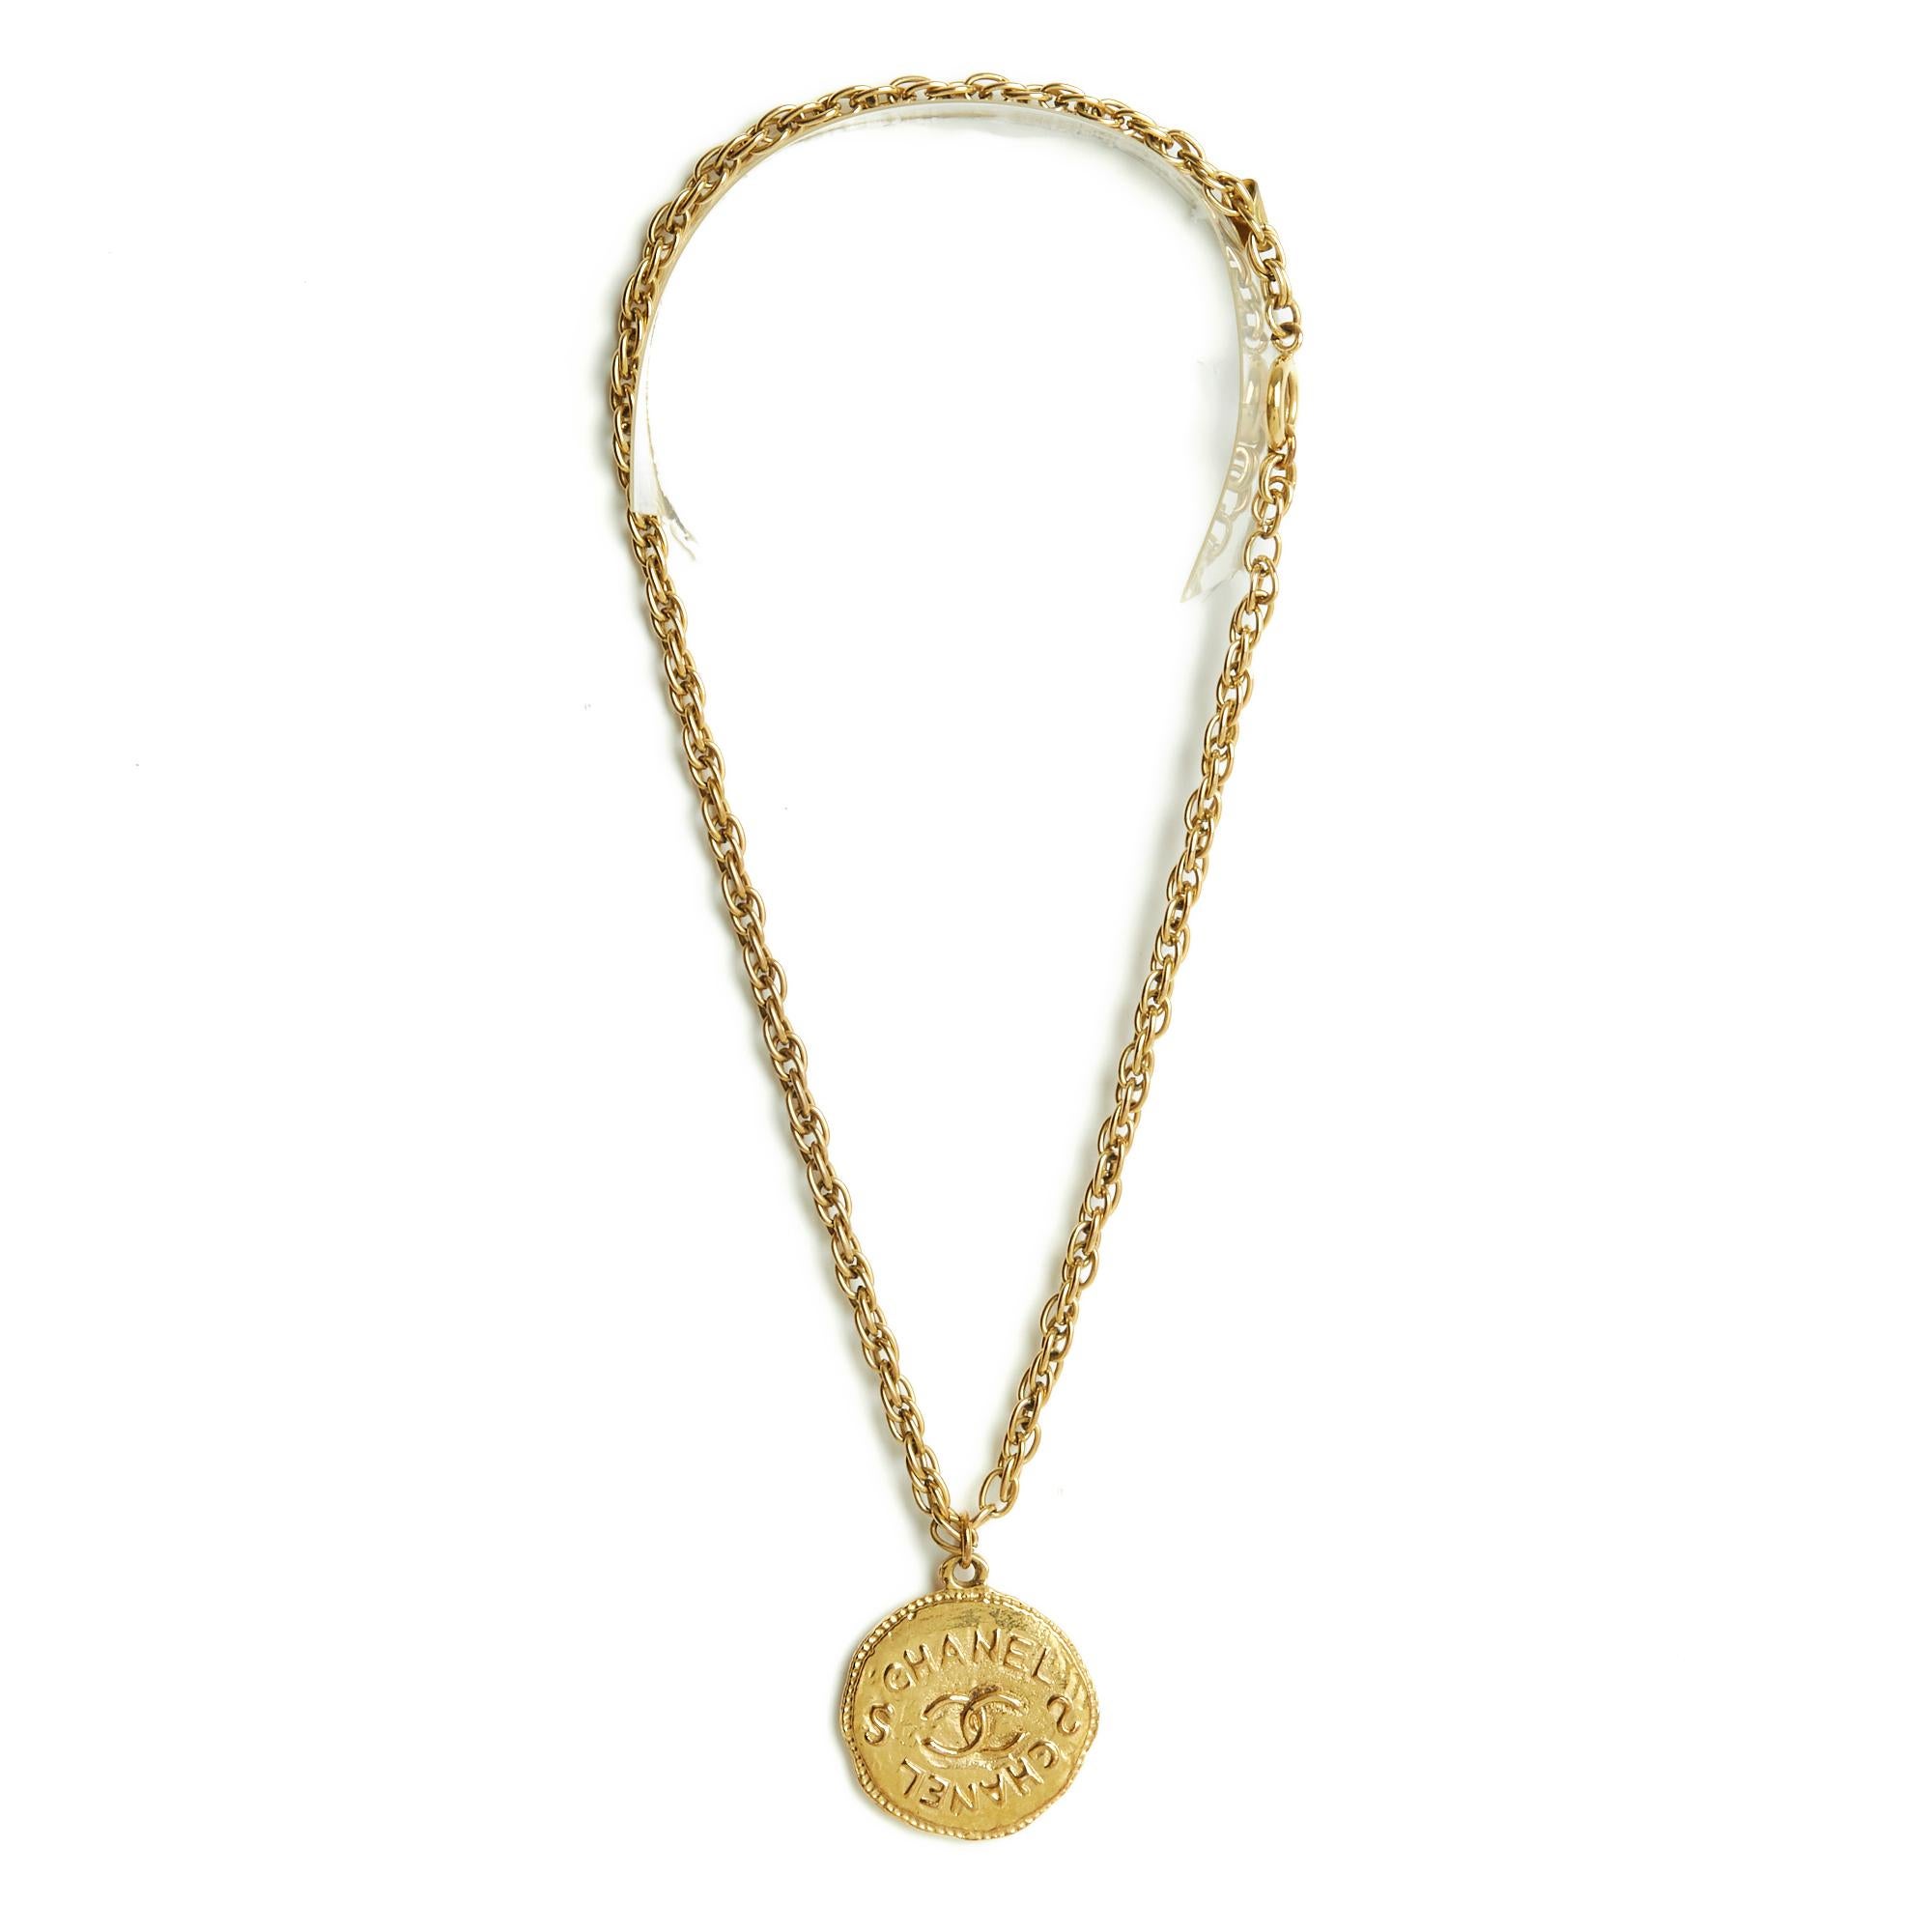 Chanel Haute Couture necklace in gold metal composed of a twisted mesh chain and a large medallion shaped with the motif of the CC logo. Total length of the chain (open) 43 cm, diameter of the medallion 3.35 cm. The necklace is vintage, in very good